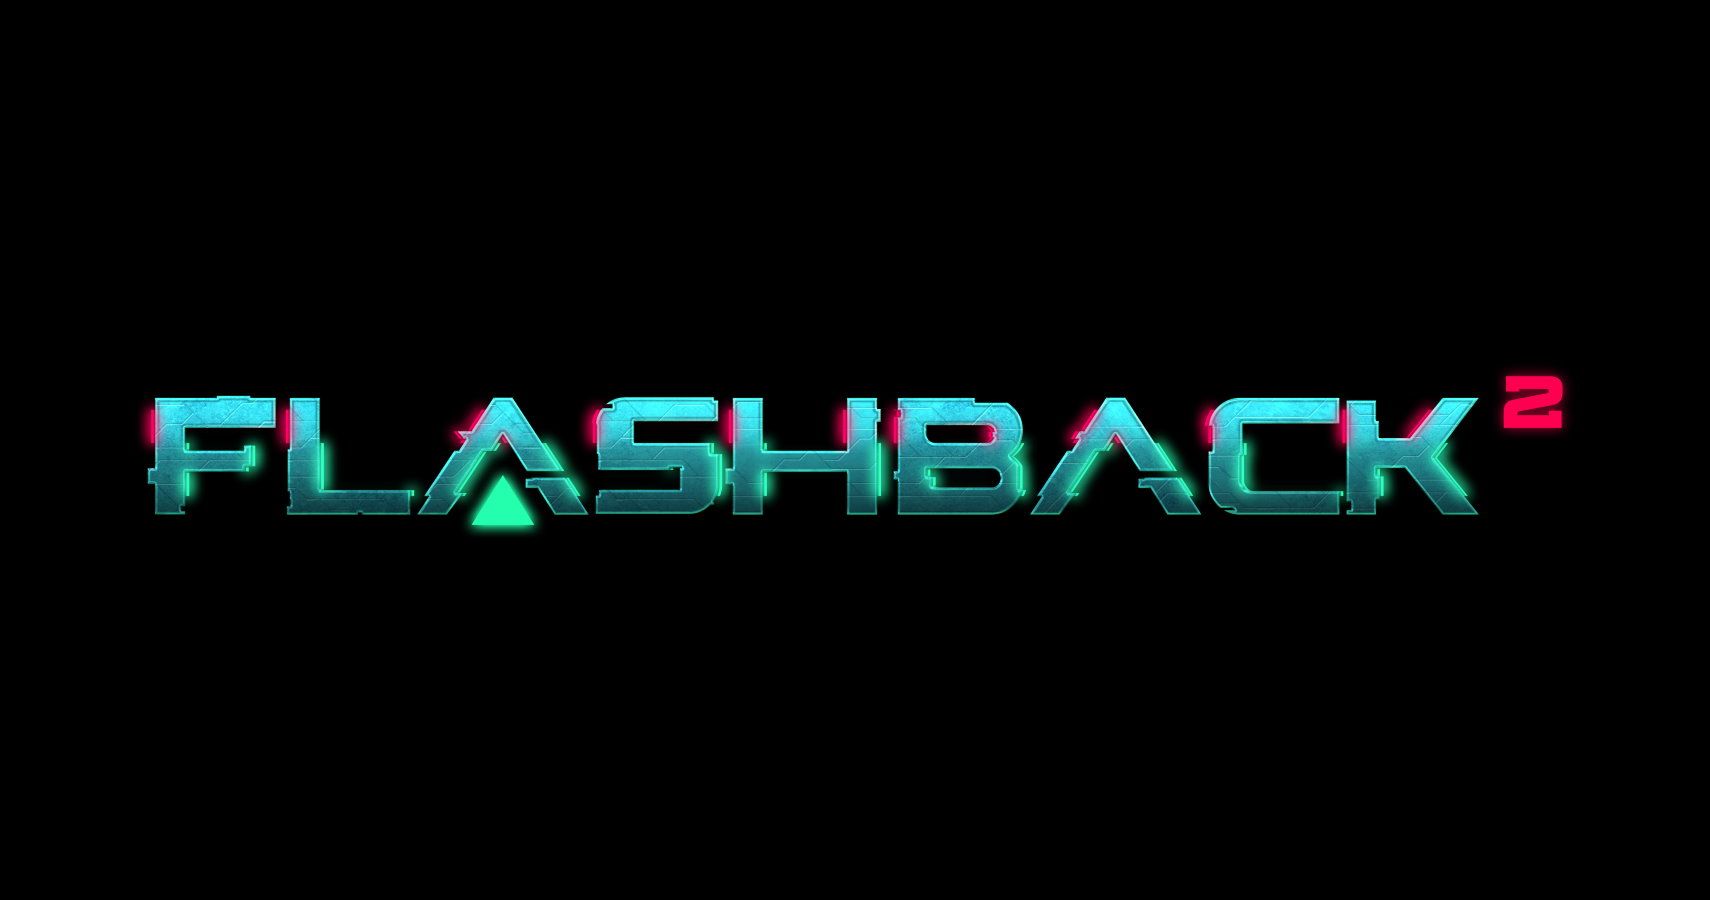 Flashback 2 Is In Development, Launches In 2022 | TheGamer